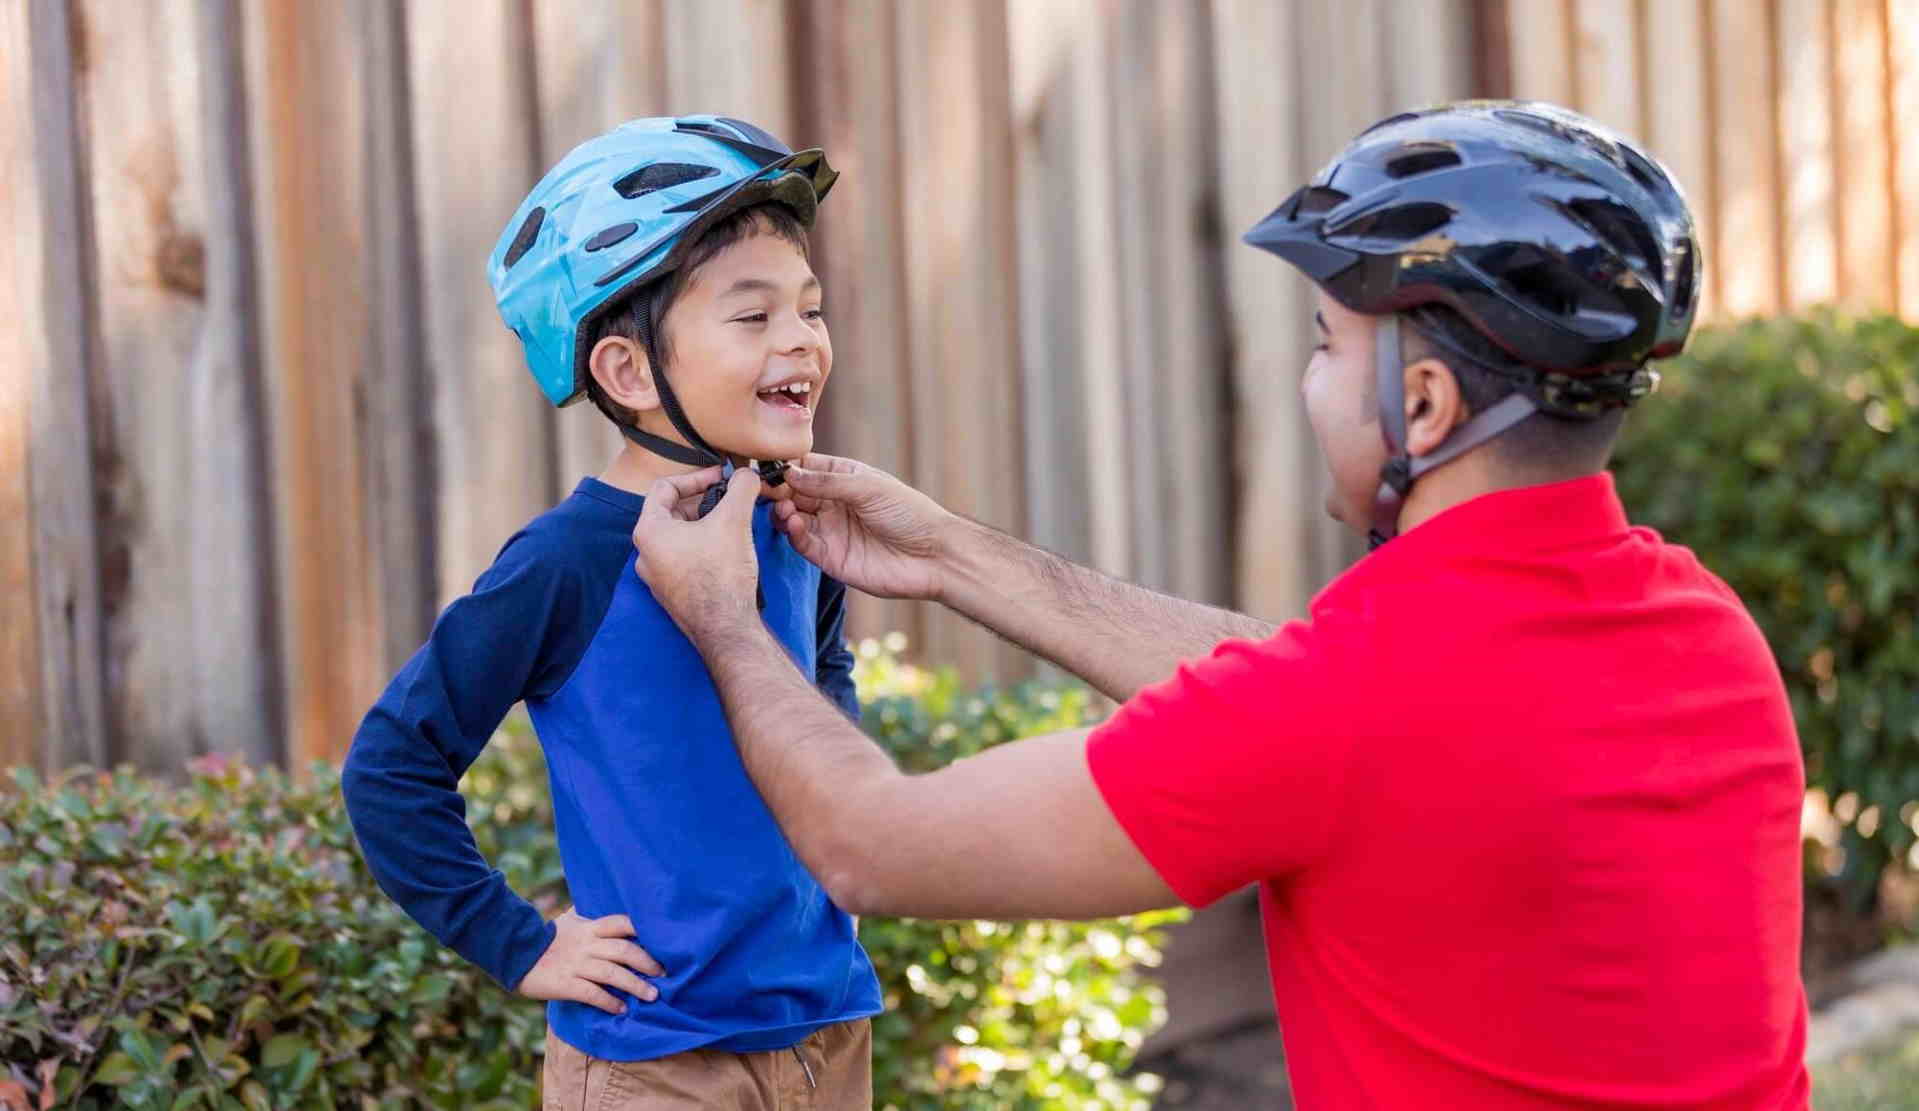 dad-helping-son-with-helmet